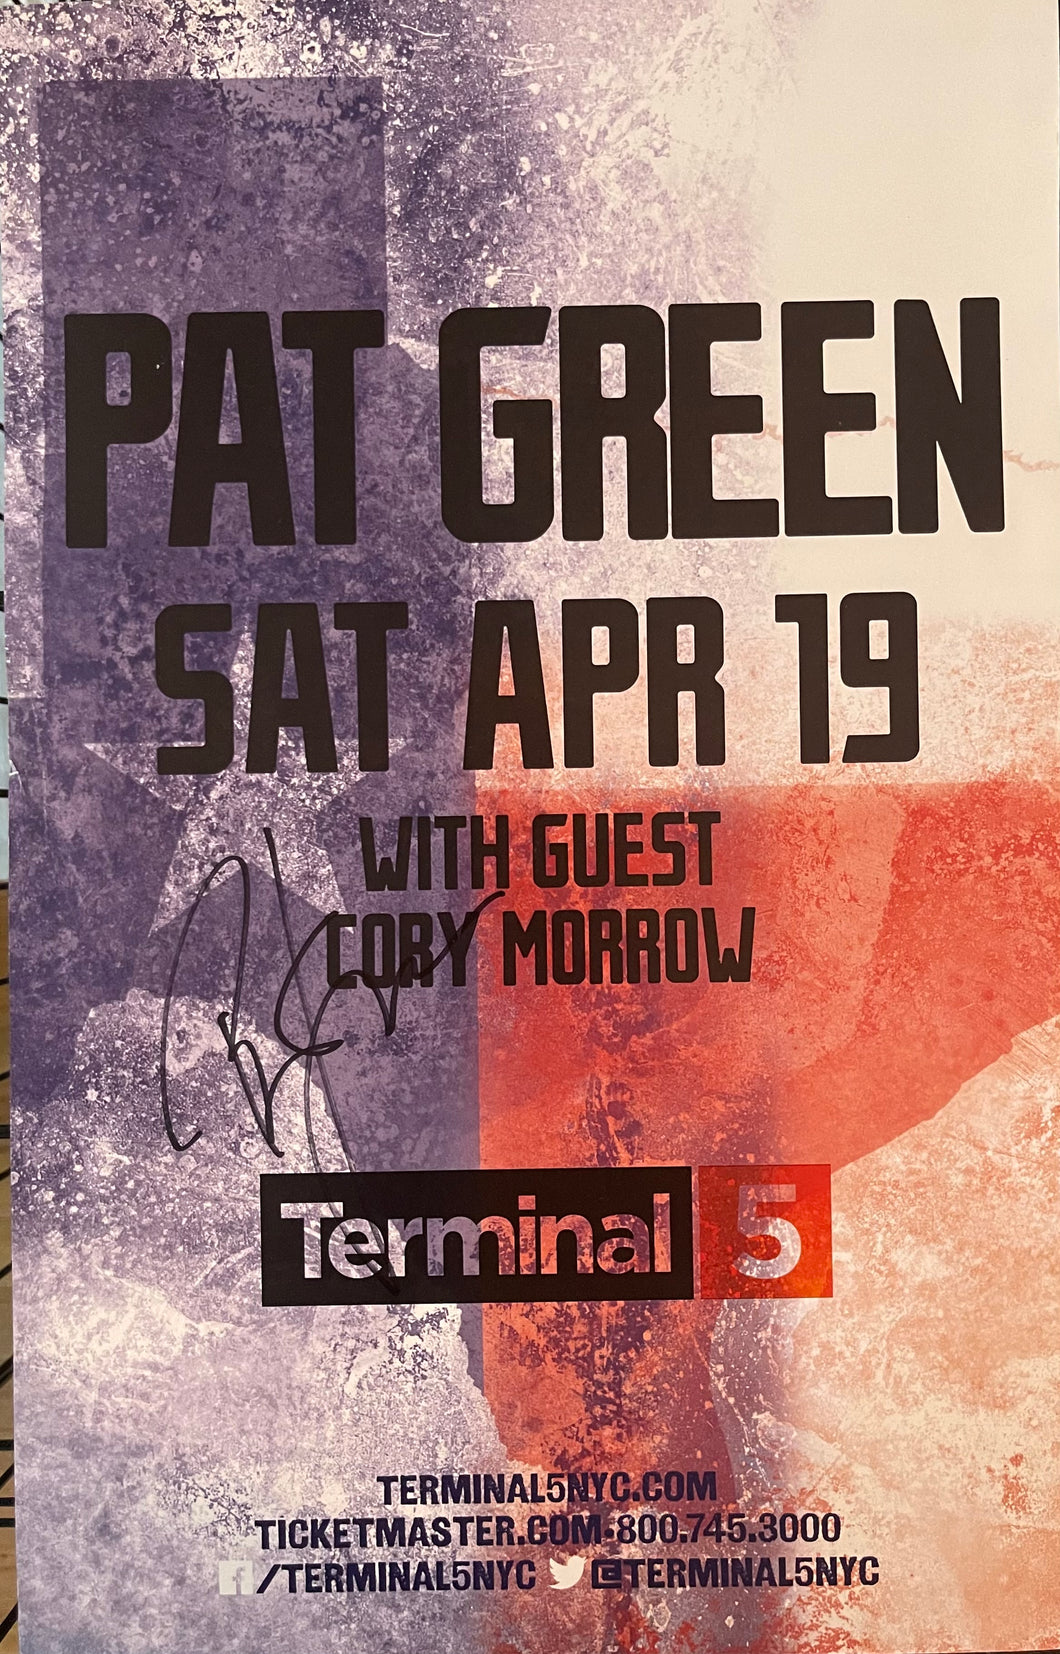 4/19/14 Show Poster